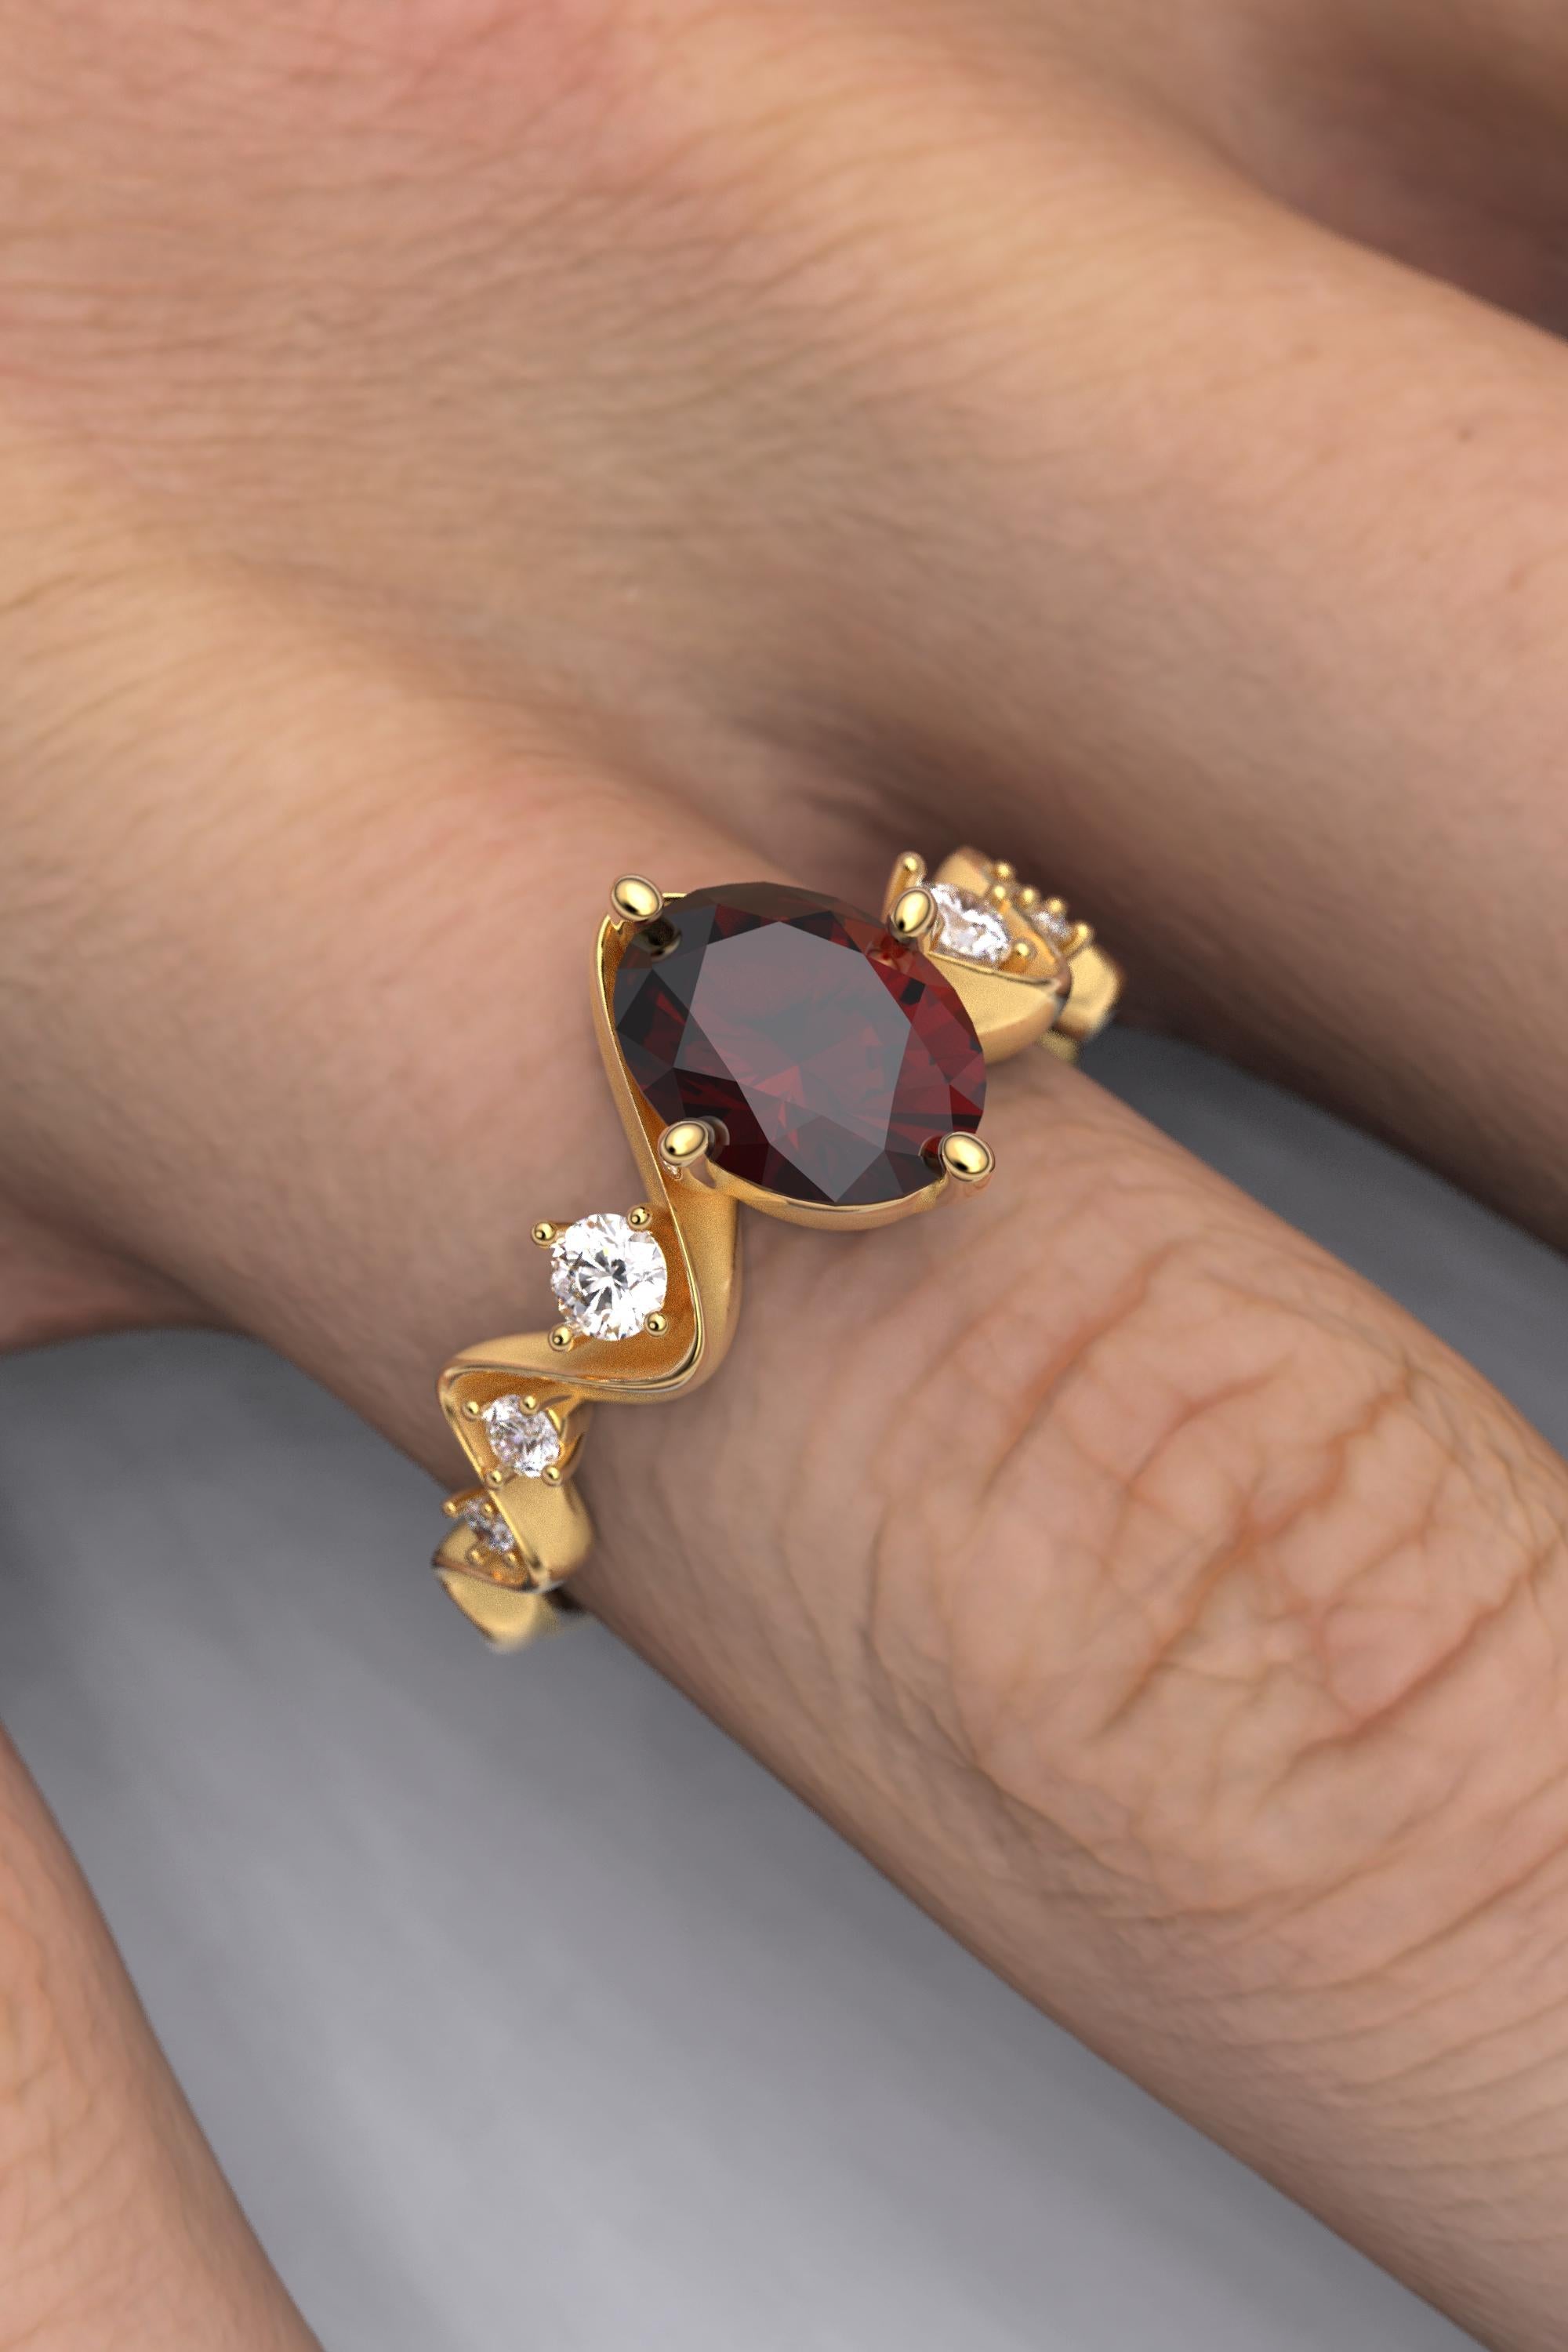 For Sale:  Garnet and Diamonds Engagement Ring Made in Italy by Oltremare Gioielli 18k Gold 3